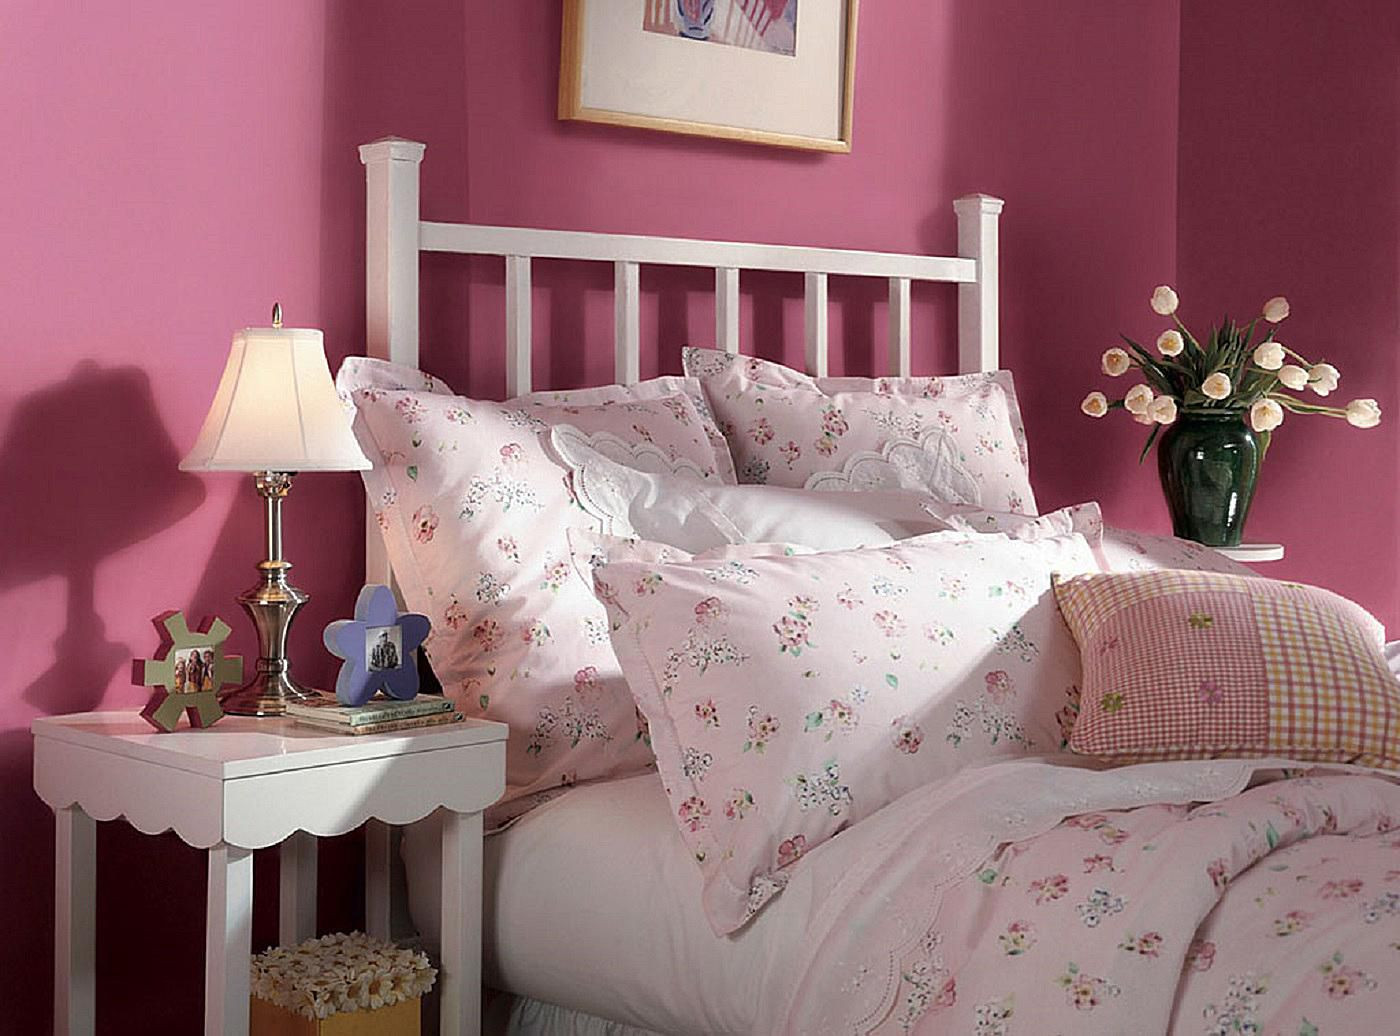 Great Bedroom Colors
 10 Great Pink and Purple Paint Colors for the Bedroom